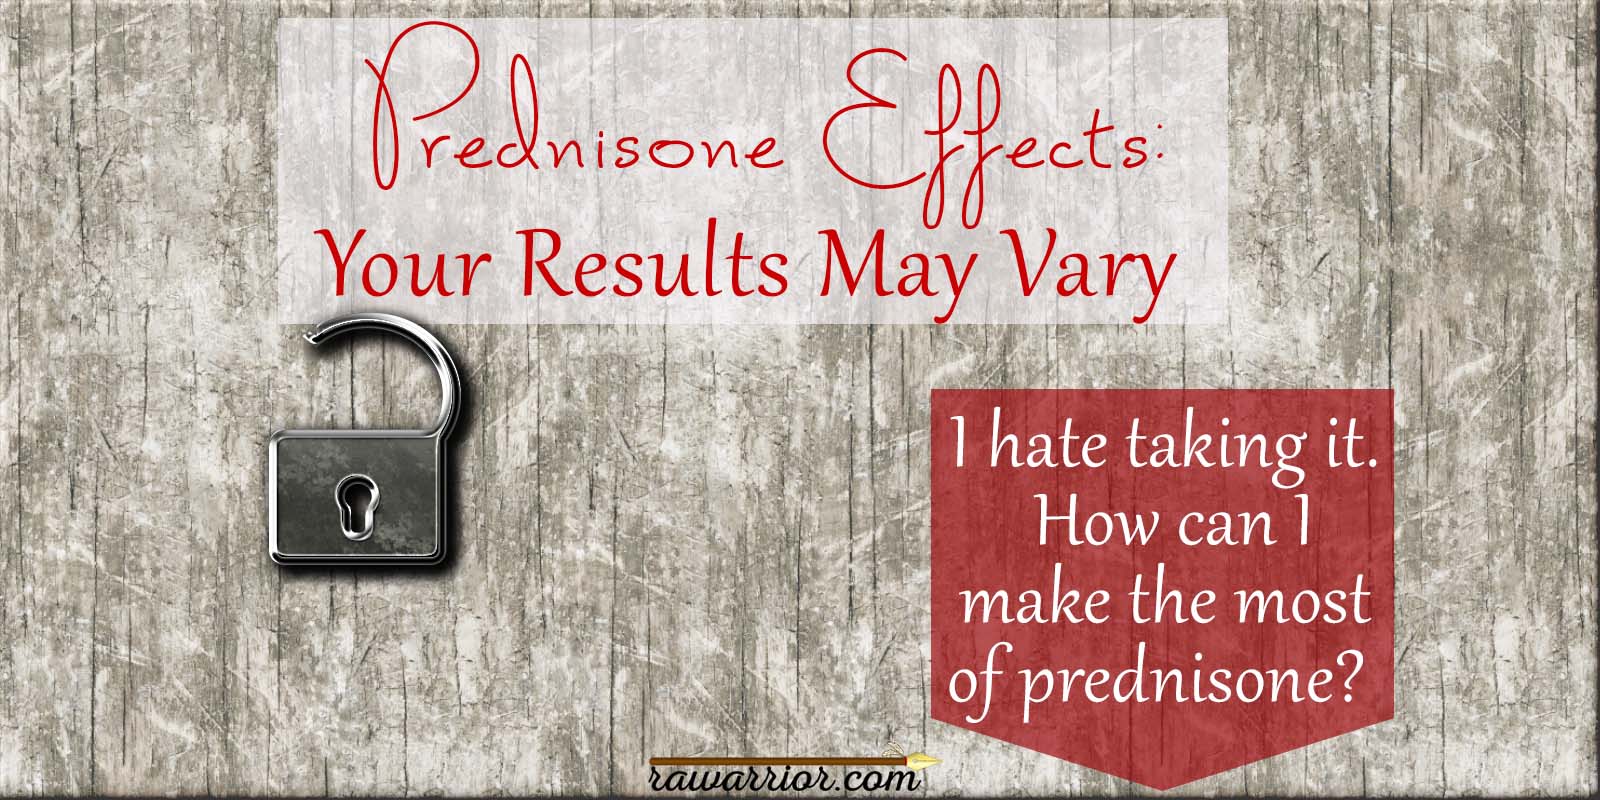 Prednisone Effects - Your Results May Vary